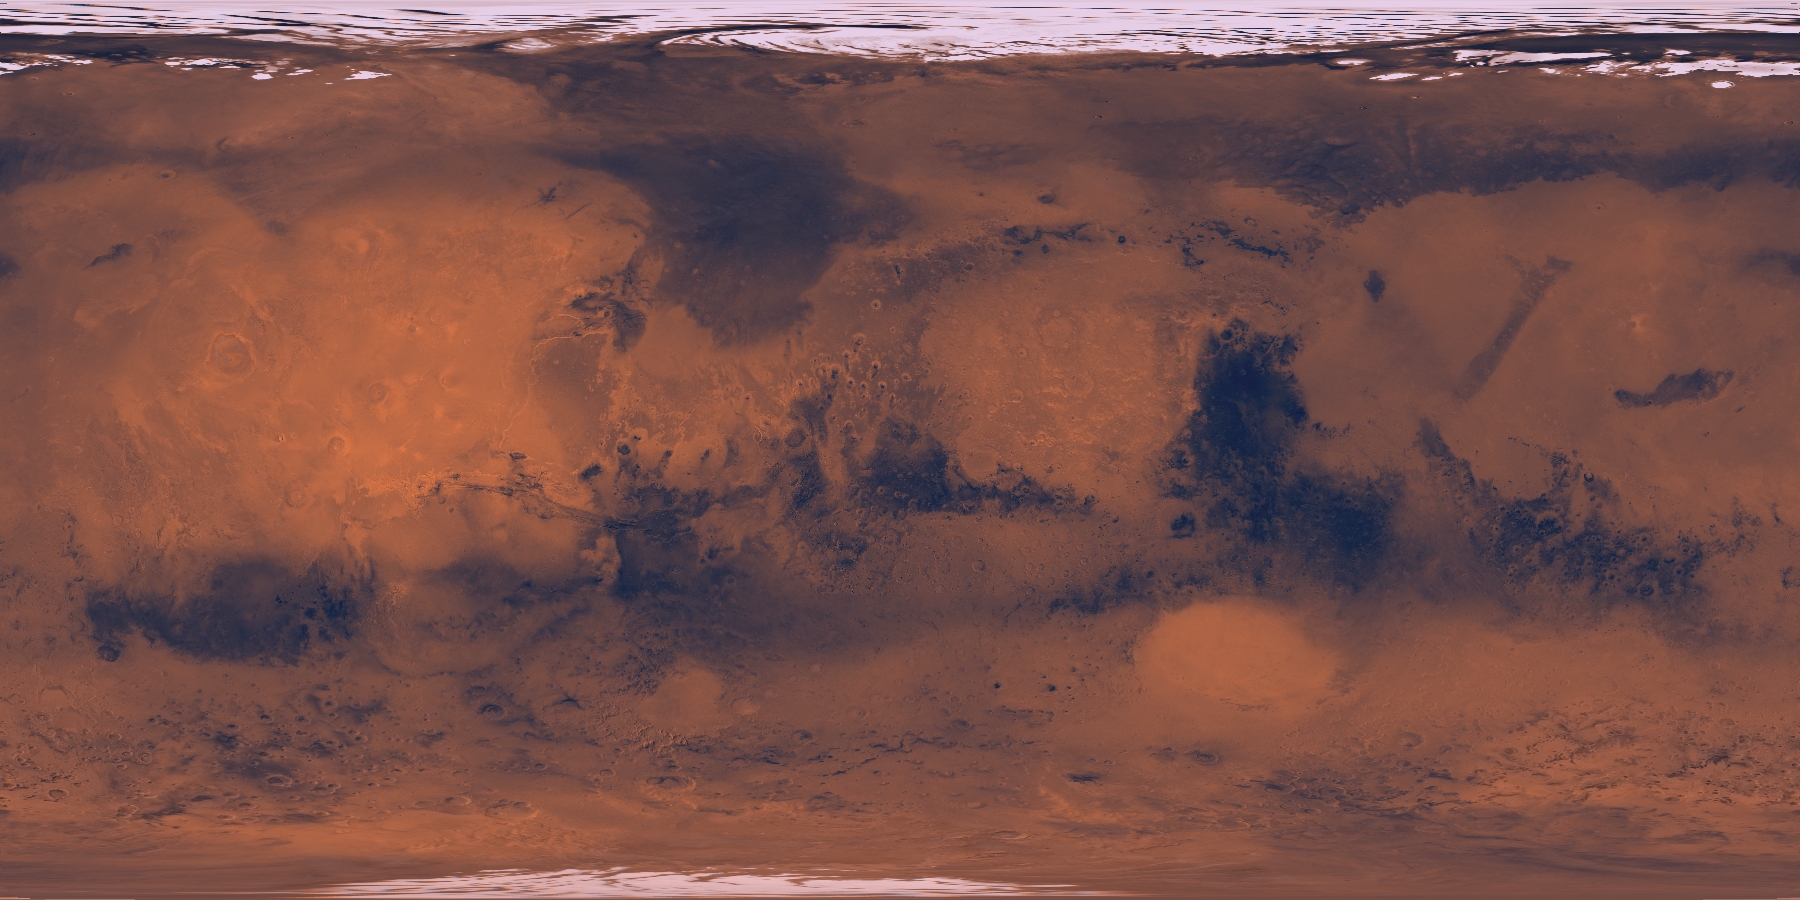 Look at detailed imagery of the Martian surface with Mars Trek